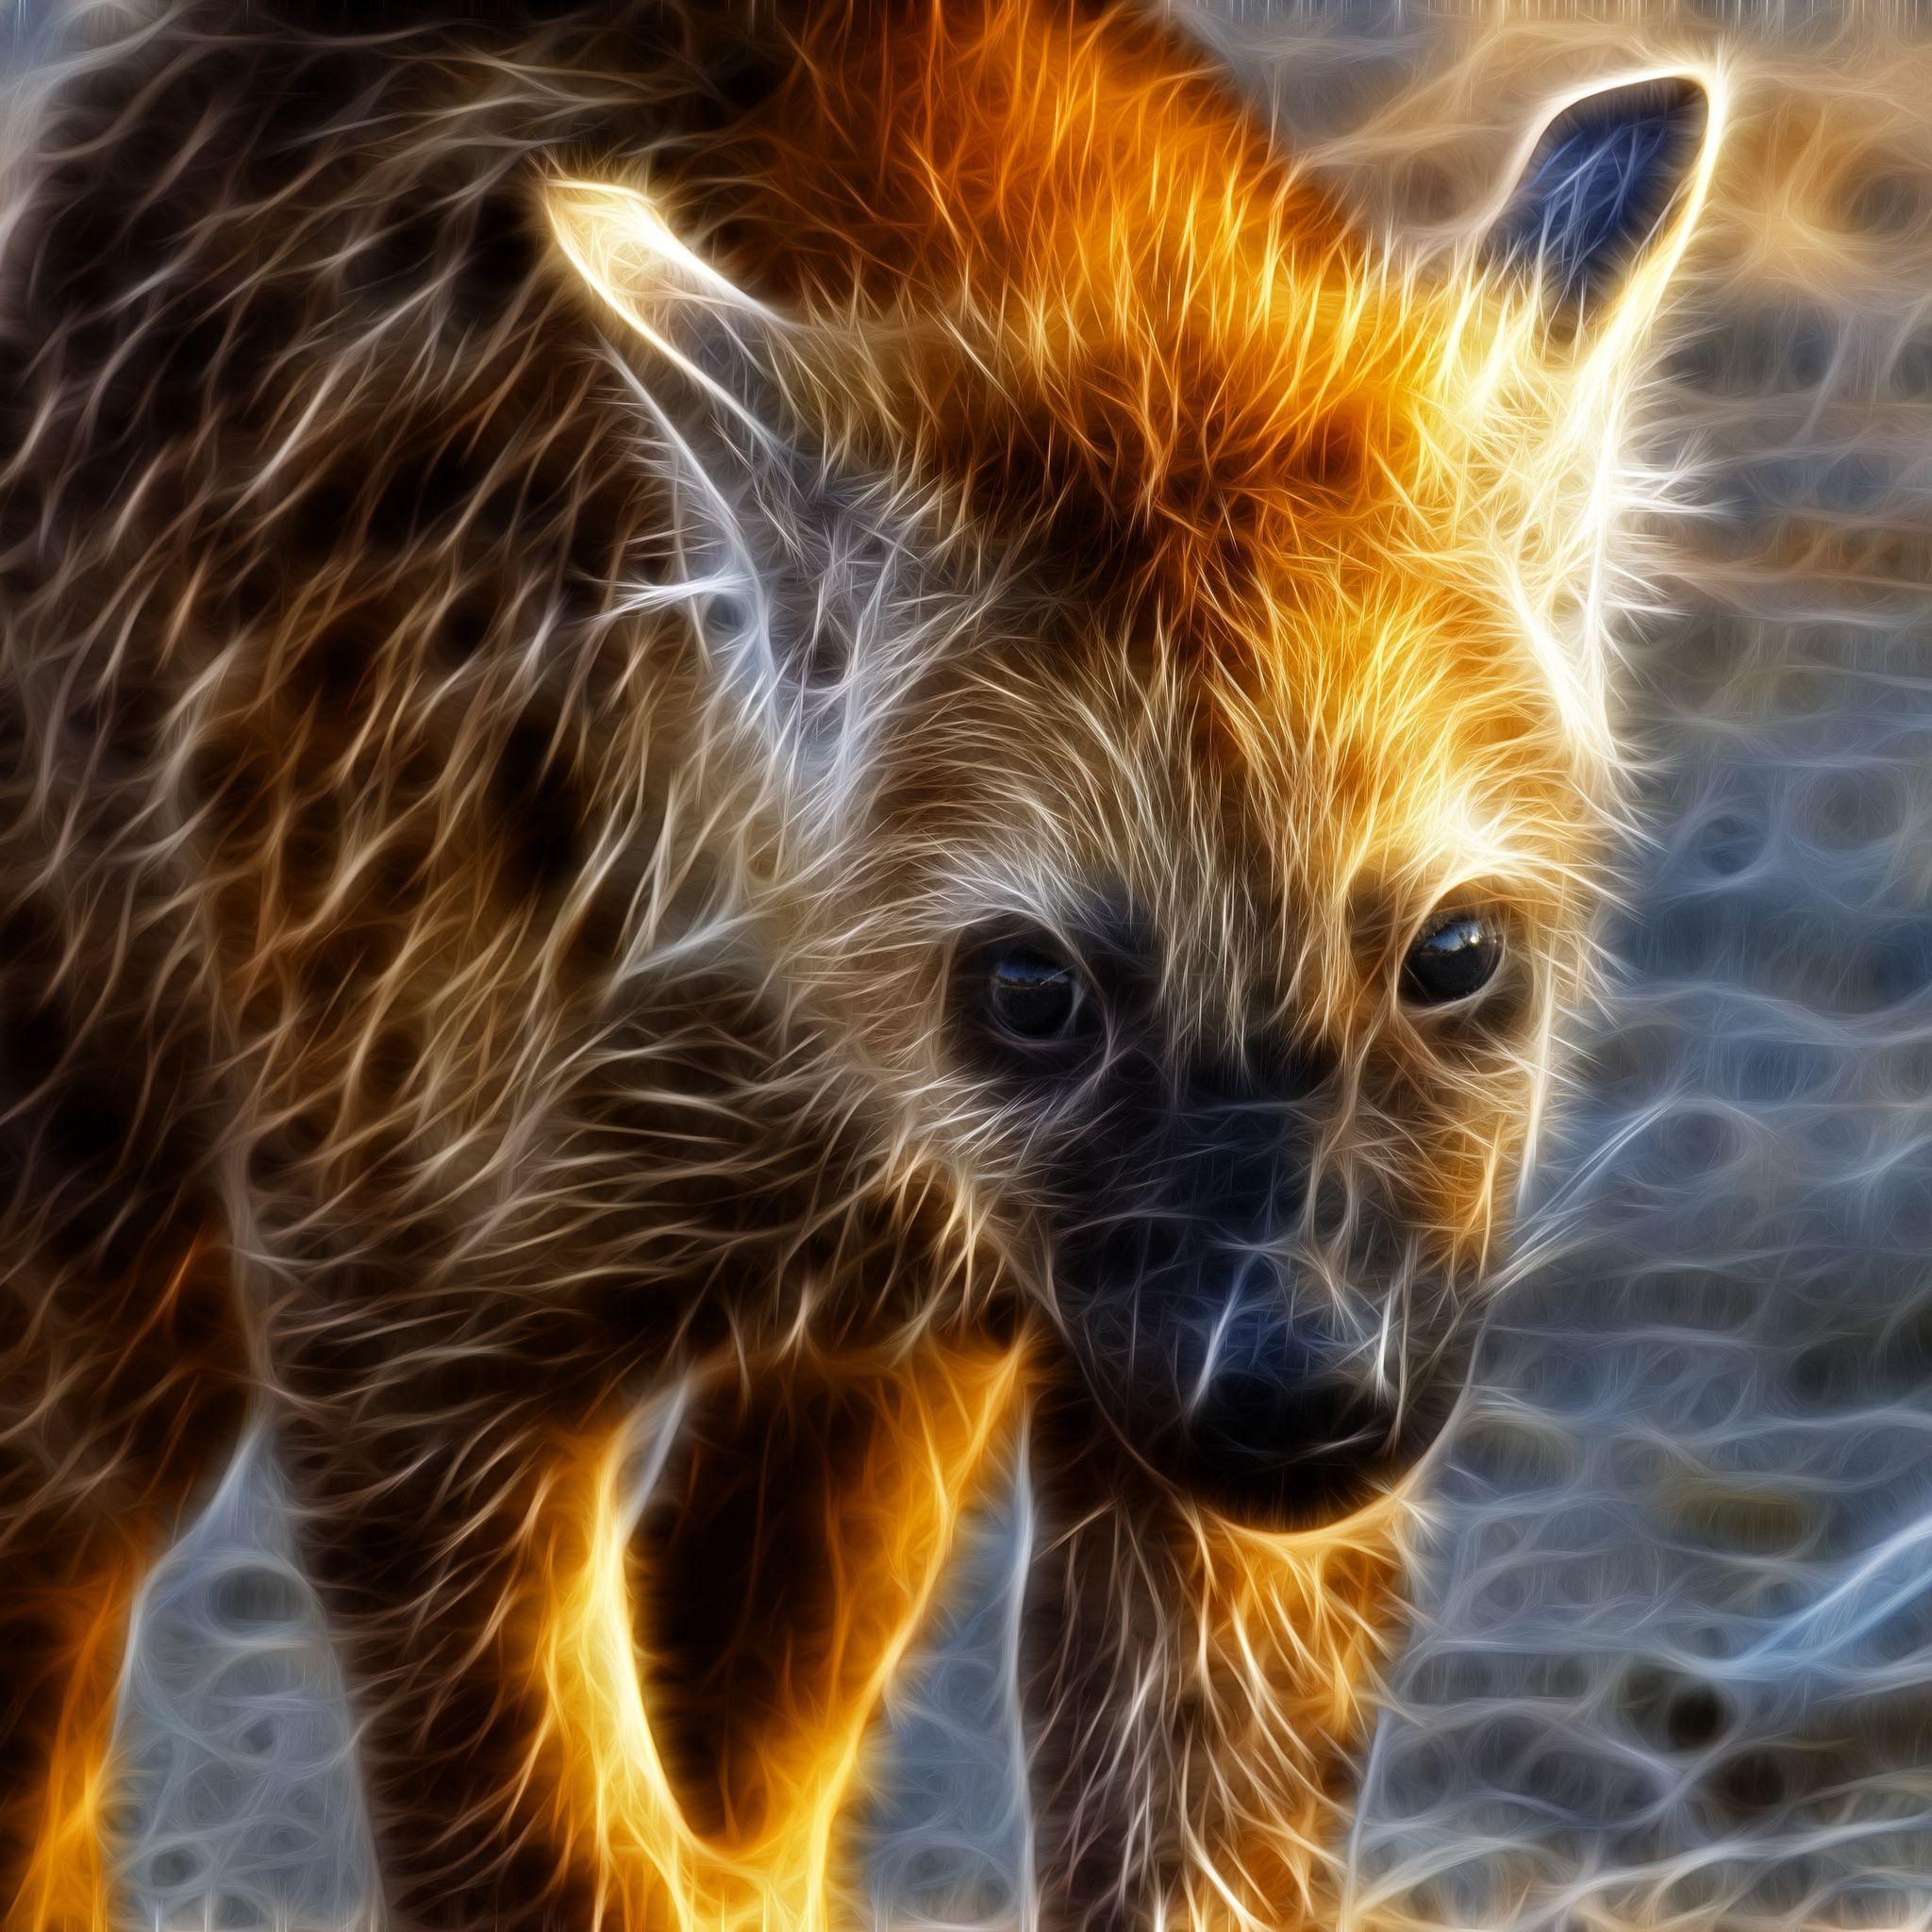 750 Hyena Pictures  Download Free Images  Stock Photos on Unsplash